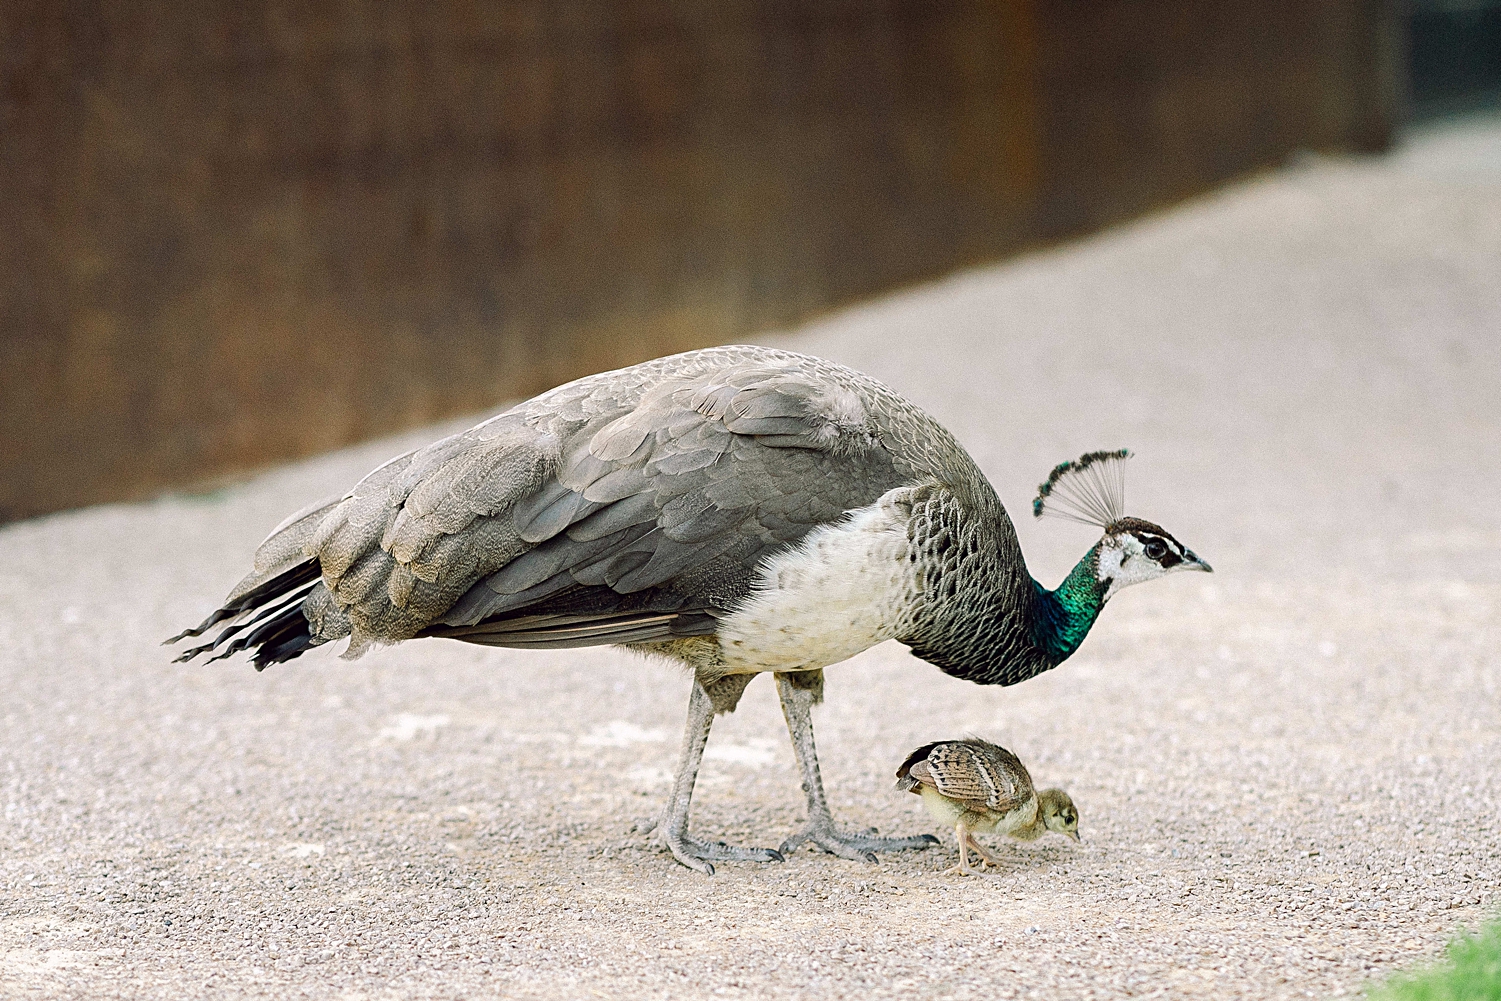 Peacock mother and chick